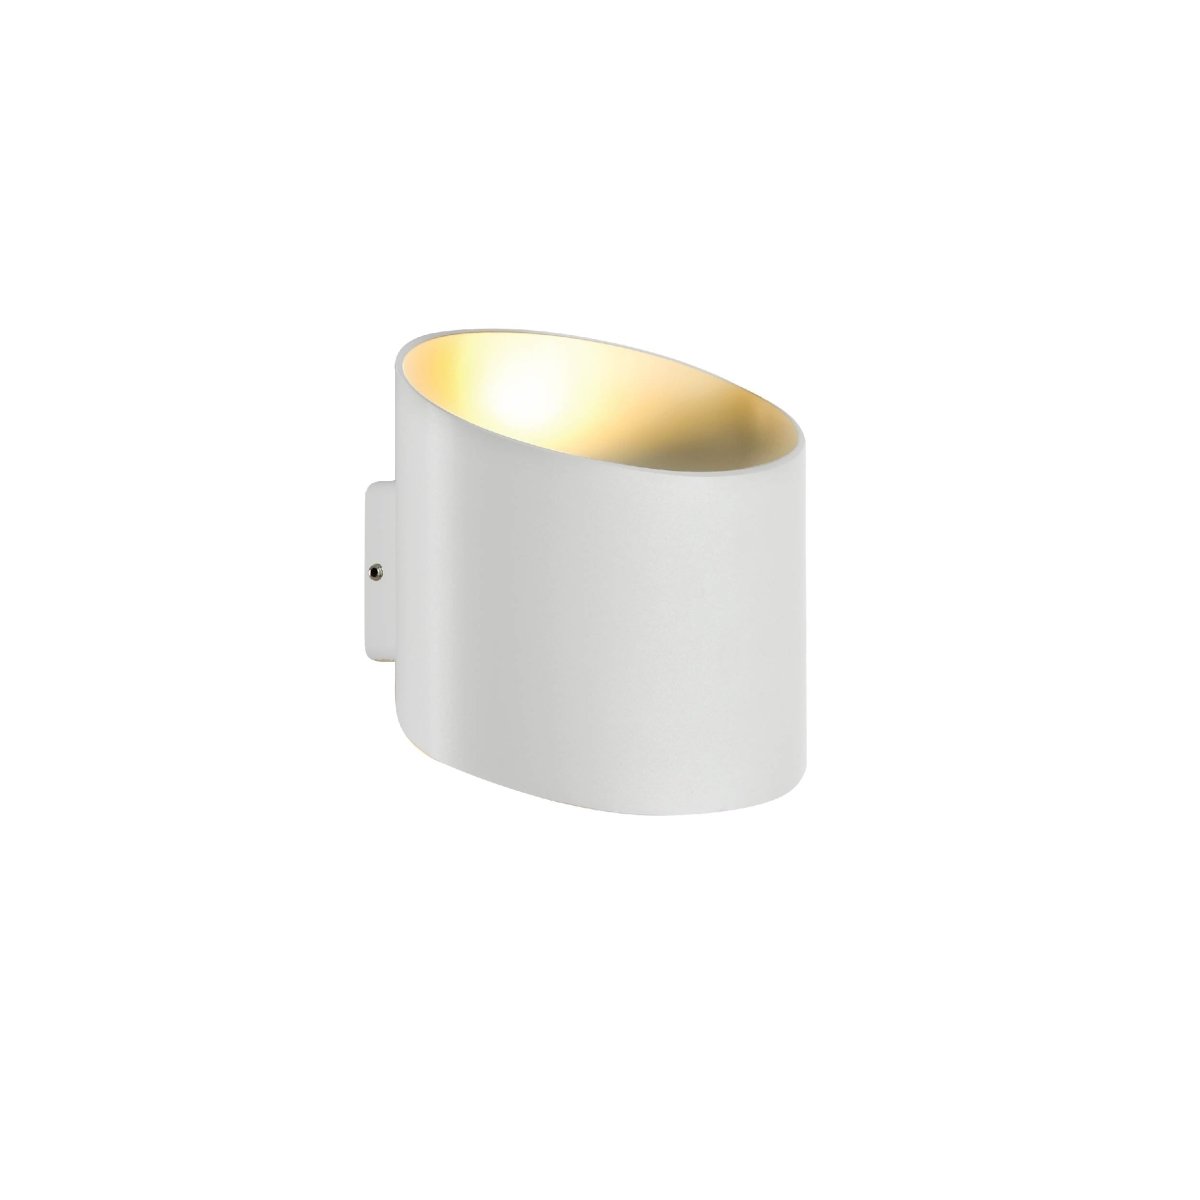 Main image of White Oblique Cylinder Up Down Outdoor Modern LED Wall Light | TEKLED 182-03382